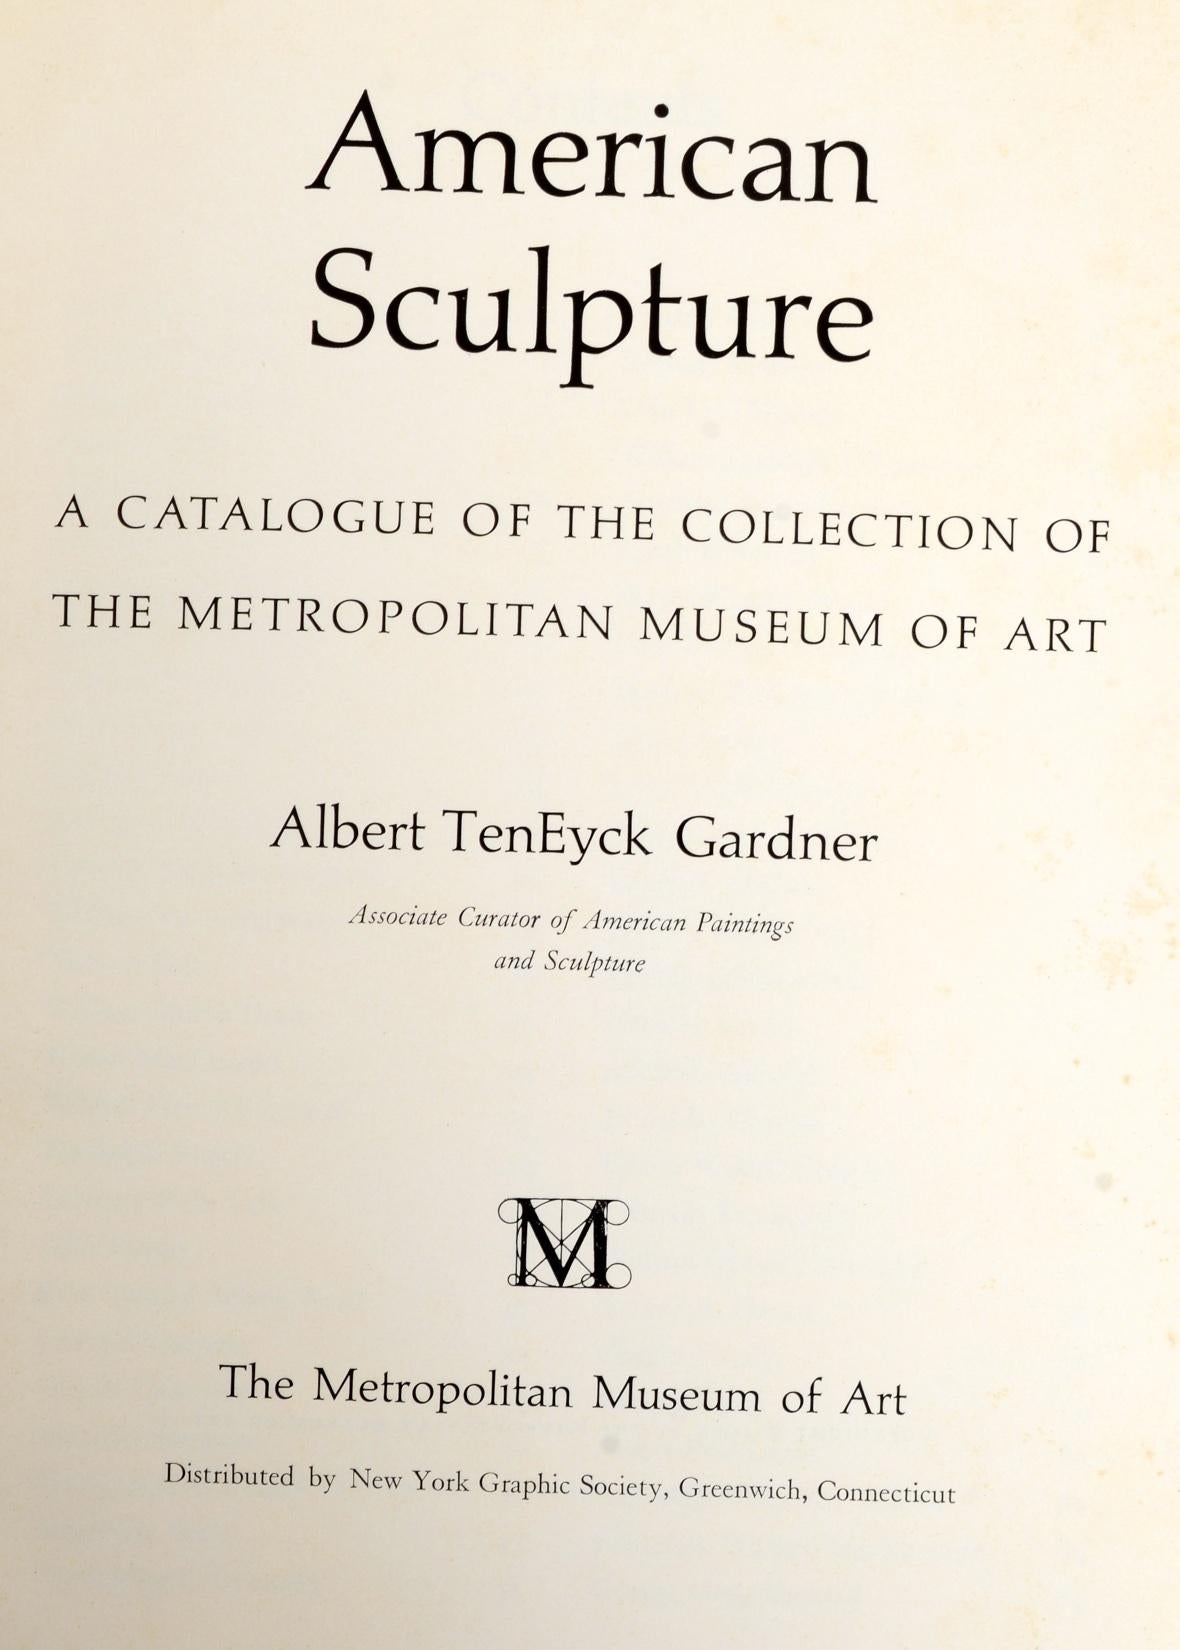 'Sculpture américaine : A Catalogue of the Collection of the Metropolitan Museum of Art